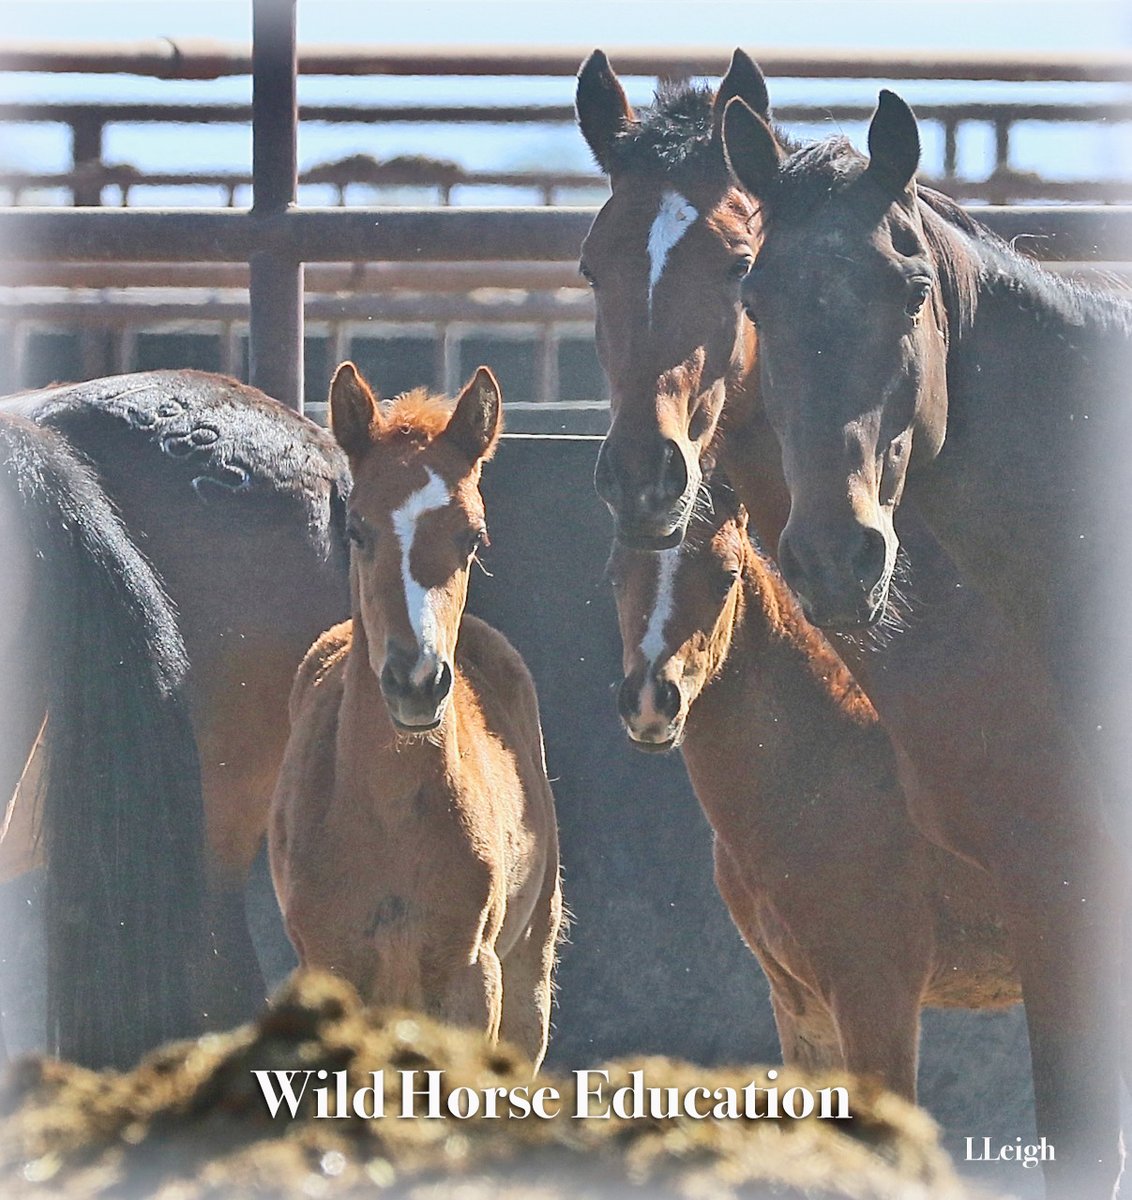 The mare & foal, the aunties & grandma.
Mares free teaching the ways of the wild & herd wisdom. Those captured that try so hard to keep family together in an unnatural world and provide protection. 
Wild or free, we honor you this #MothersDay #wildhorses
WildHorseEducation.org